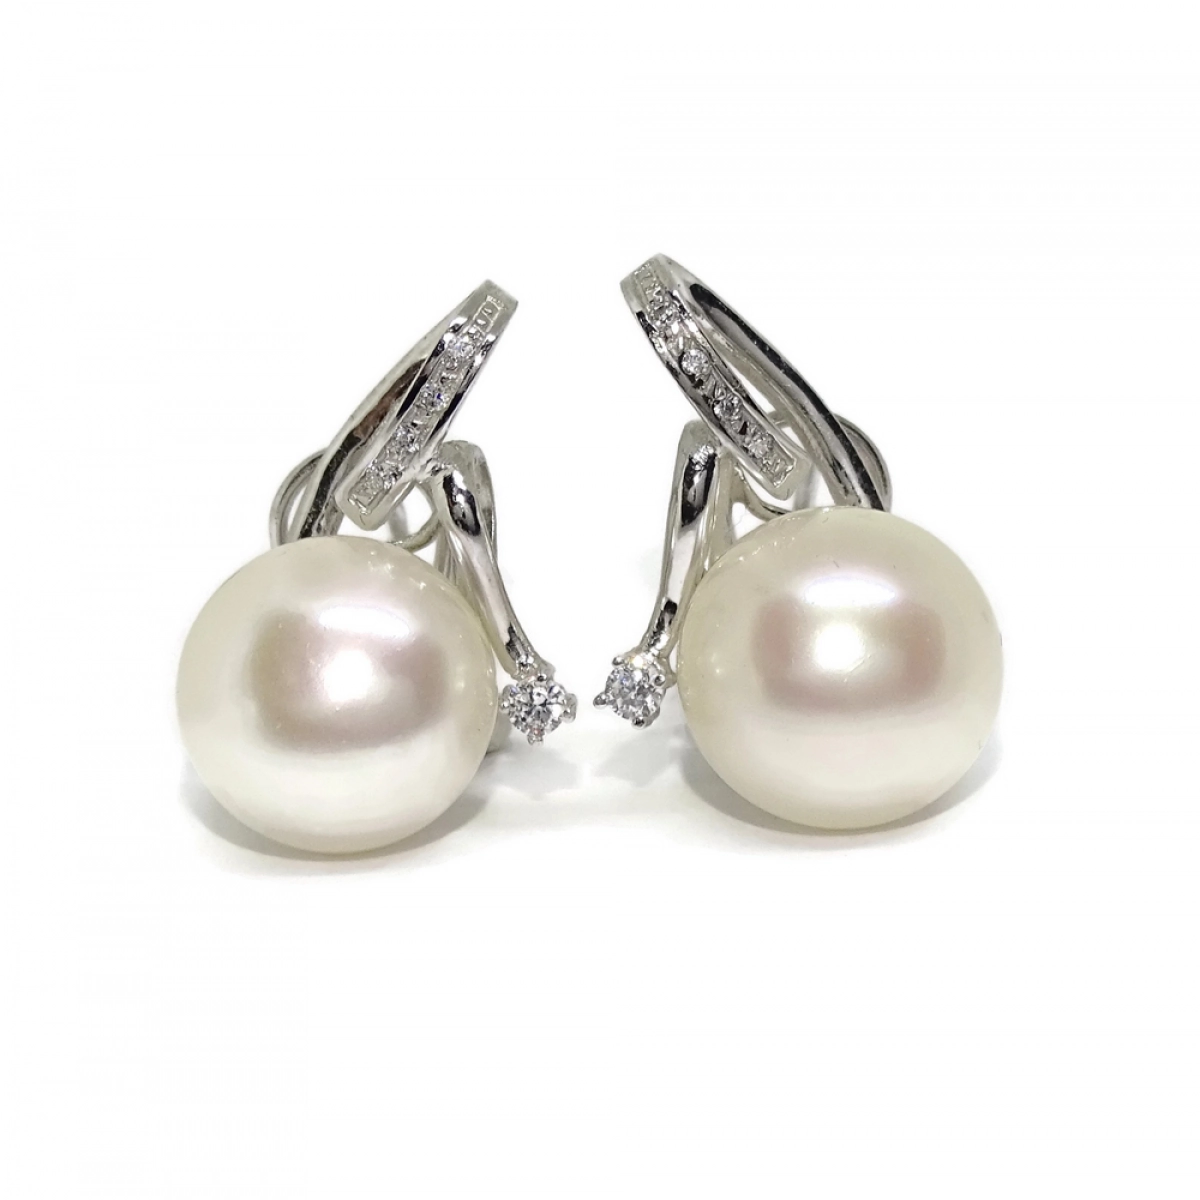 EARRINGS OF WHITE GOLD 18K WITH 10 ZIRCONS AND PEARLS CULTIVATED IN BOT�N 12MM. NEVER SAY NEVER